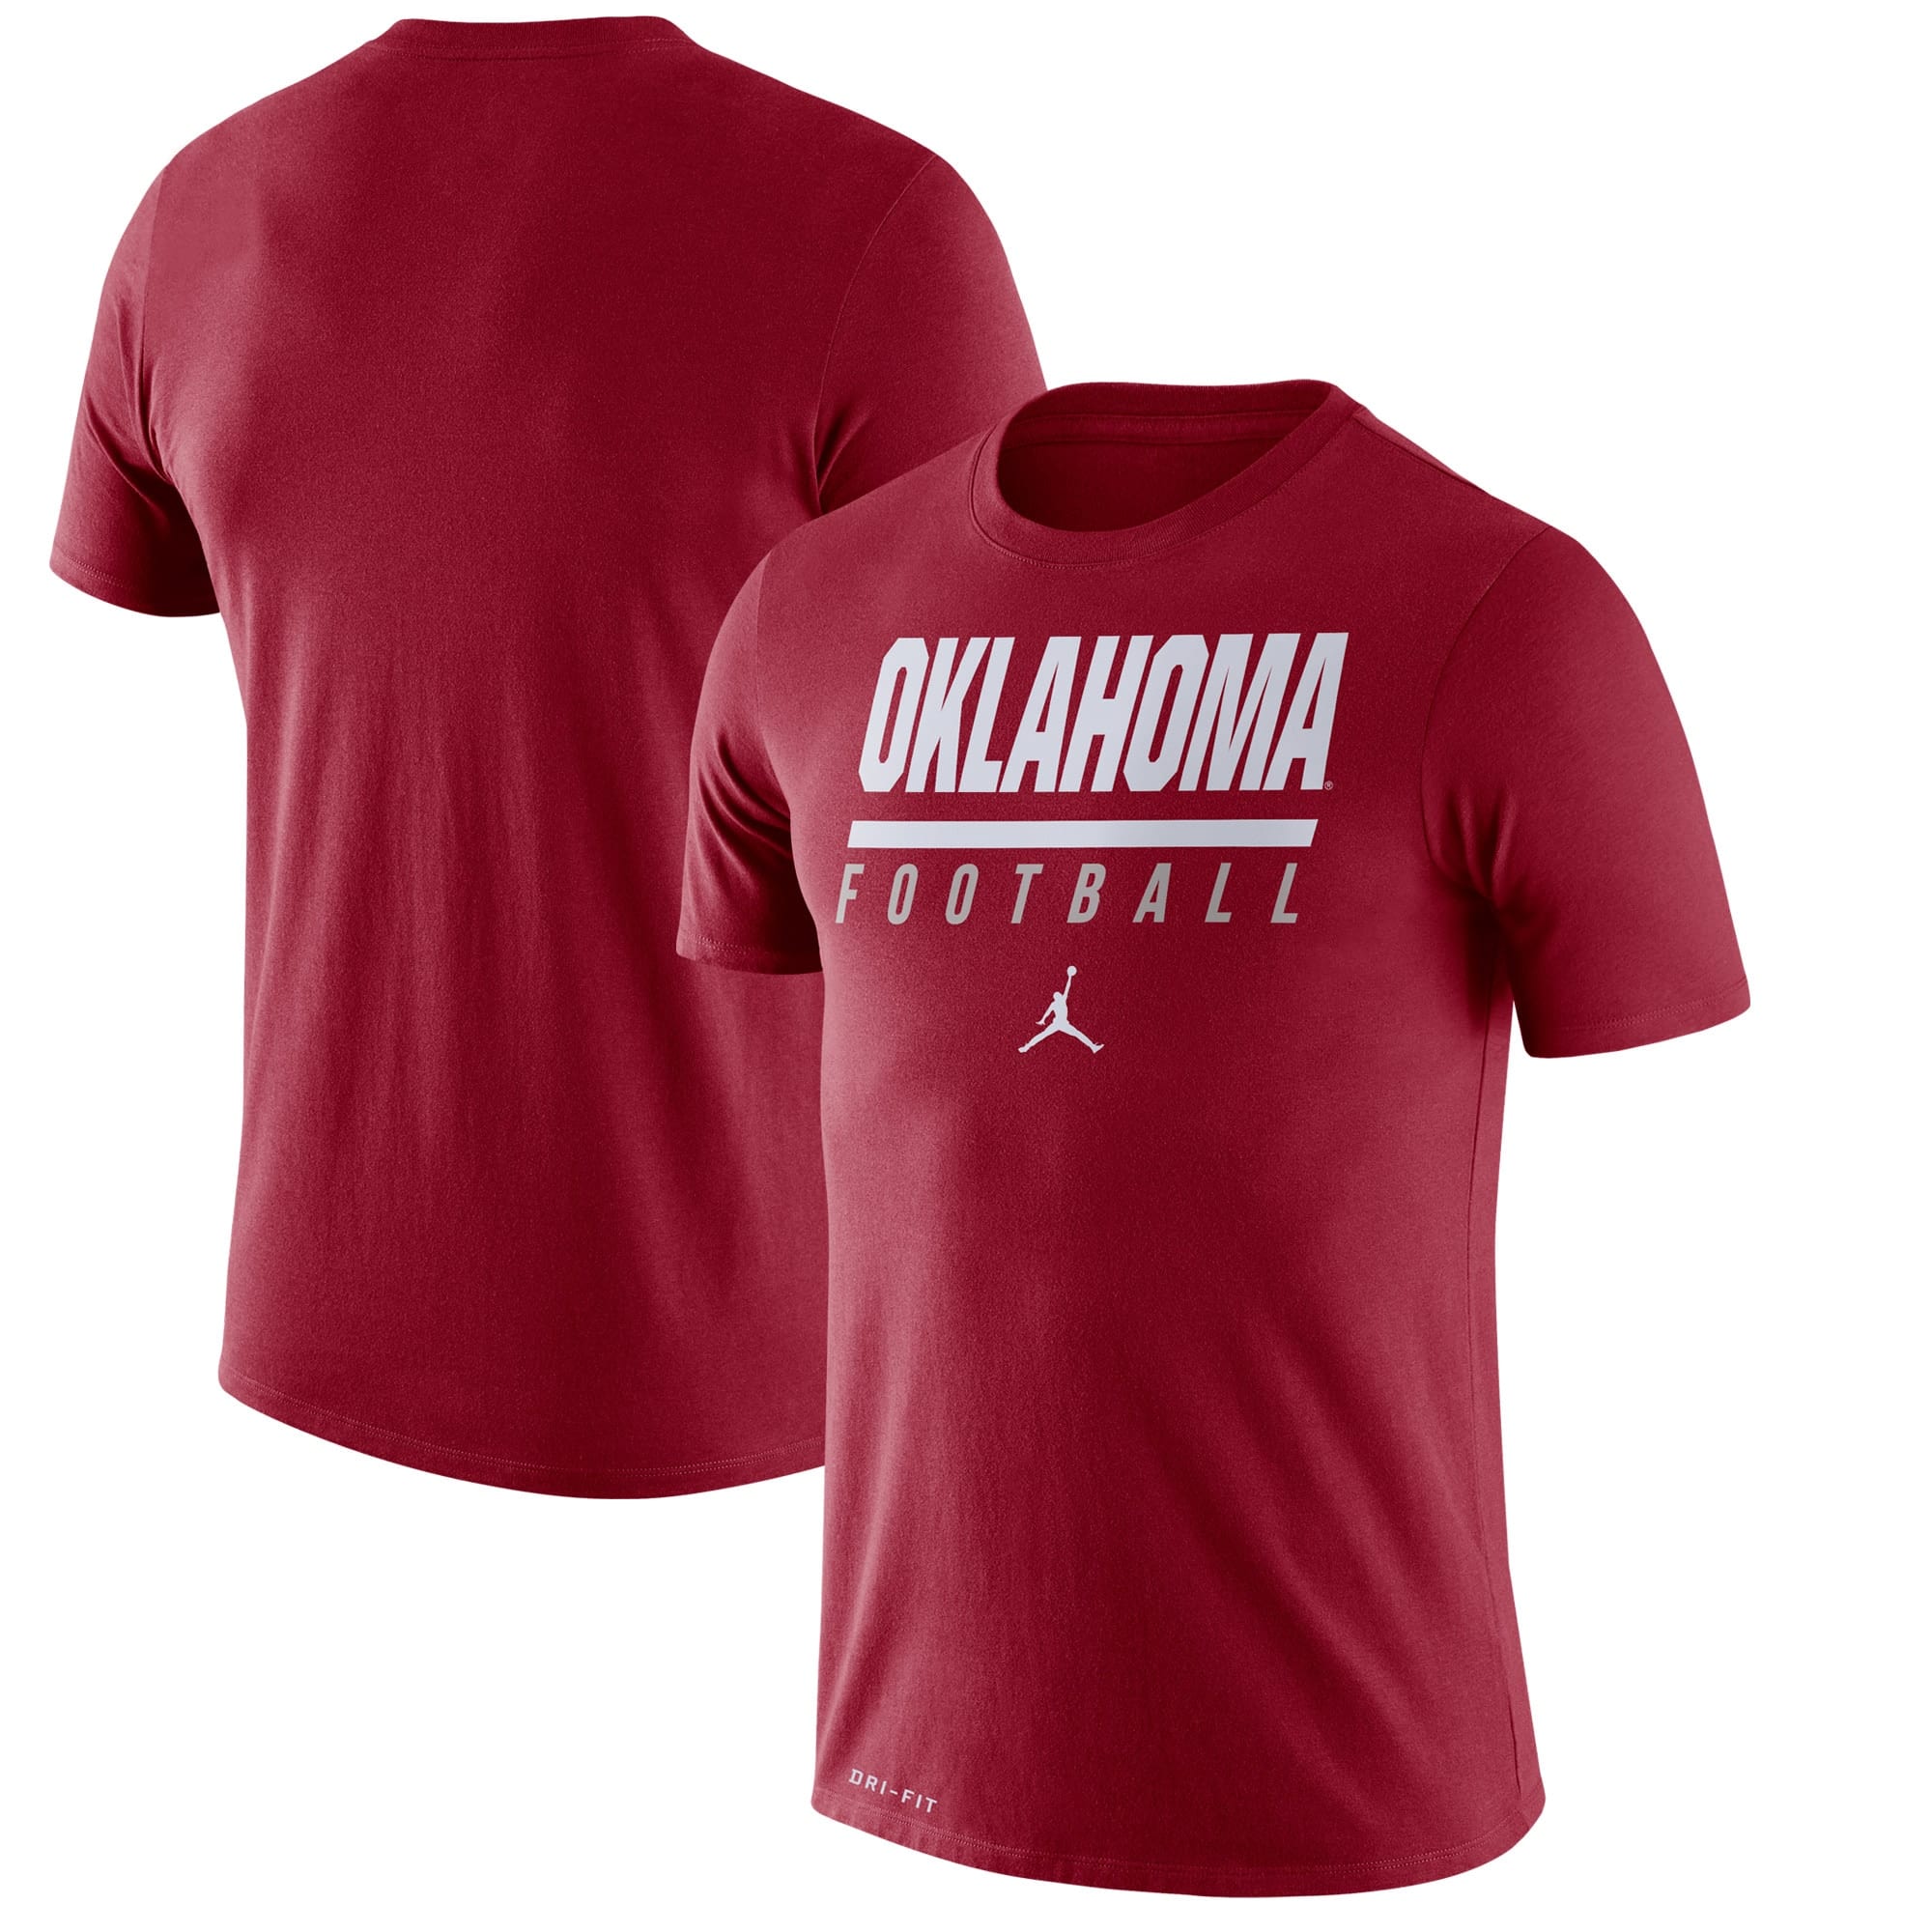 Father's Day gifts for the Oklahoma Sooners fan